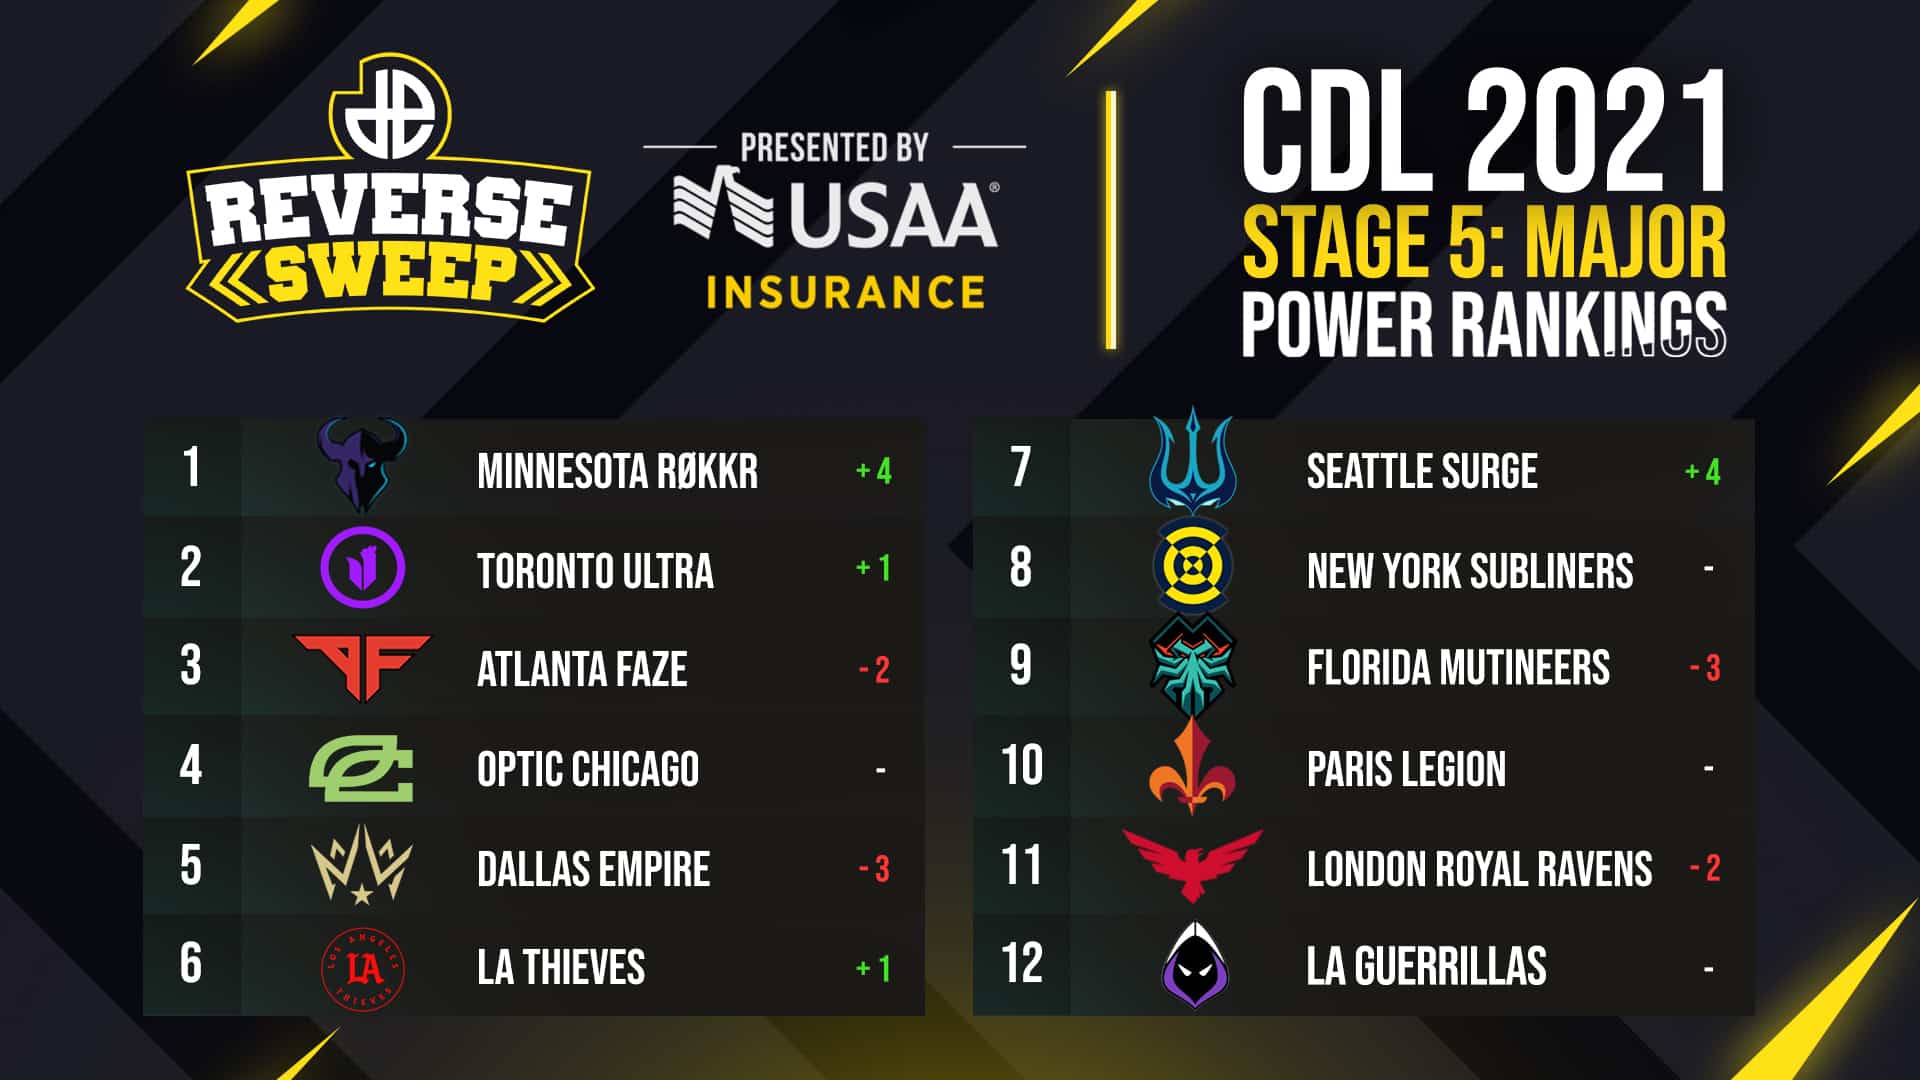 CDL power rankings after Stage 5 Major